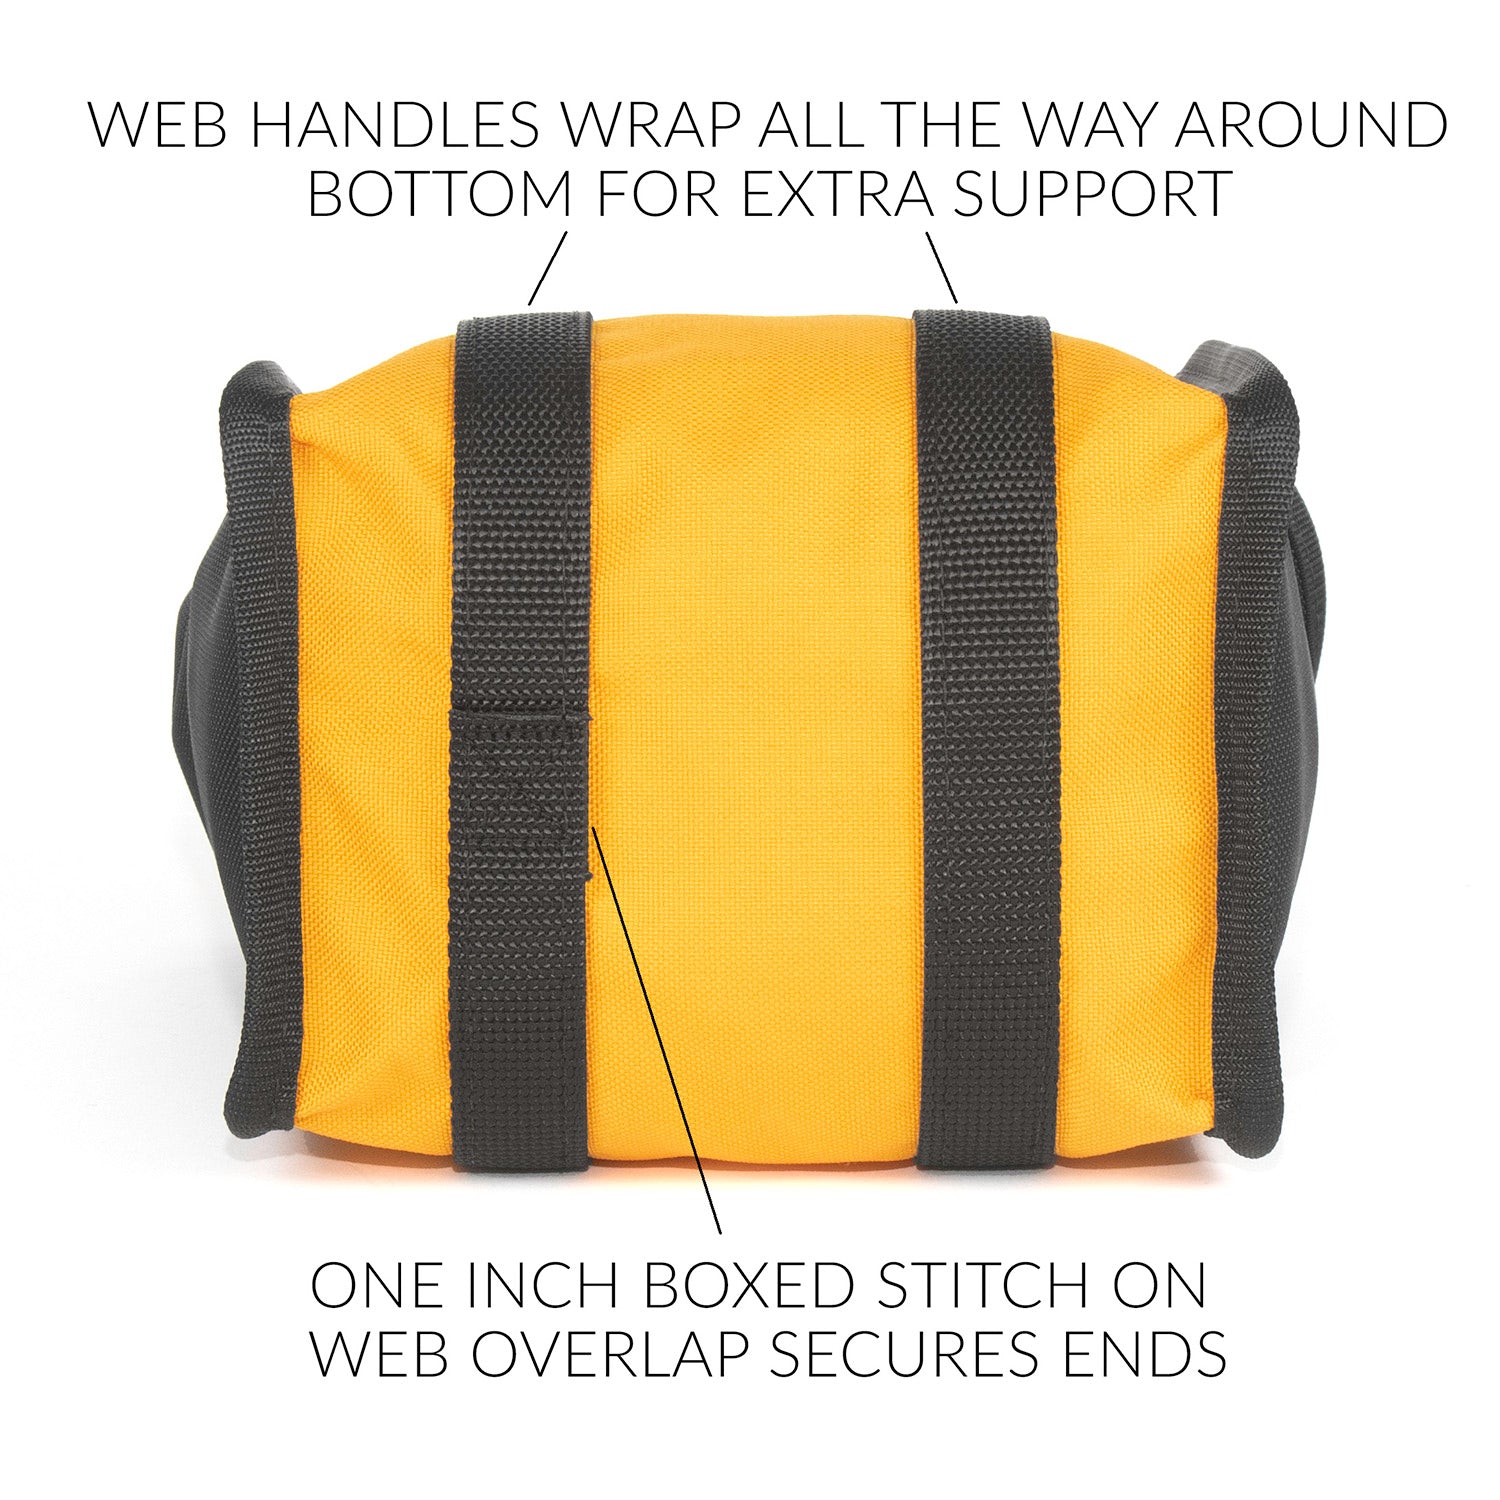 Web handles wrap all the way around bottom for extra support. One inch boxed stitch on web overlap secures ends. 